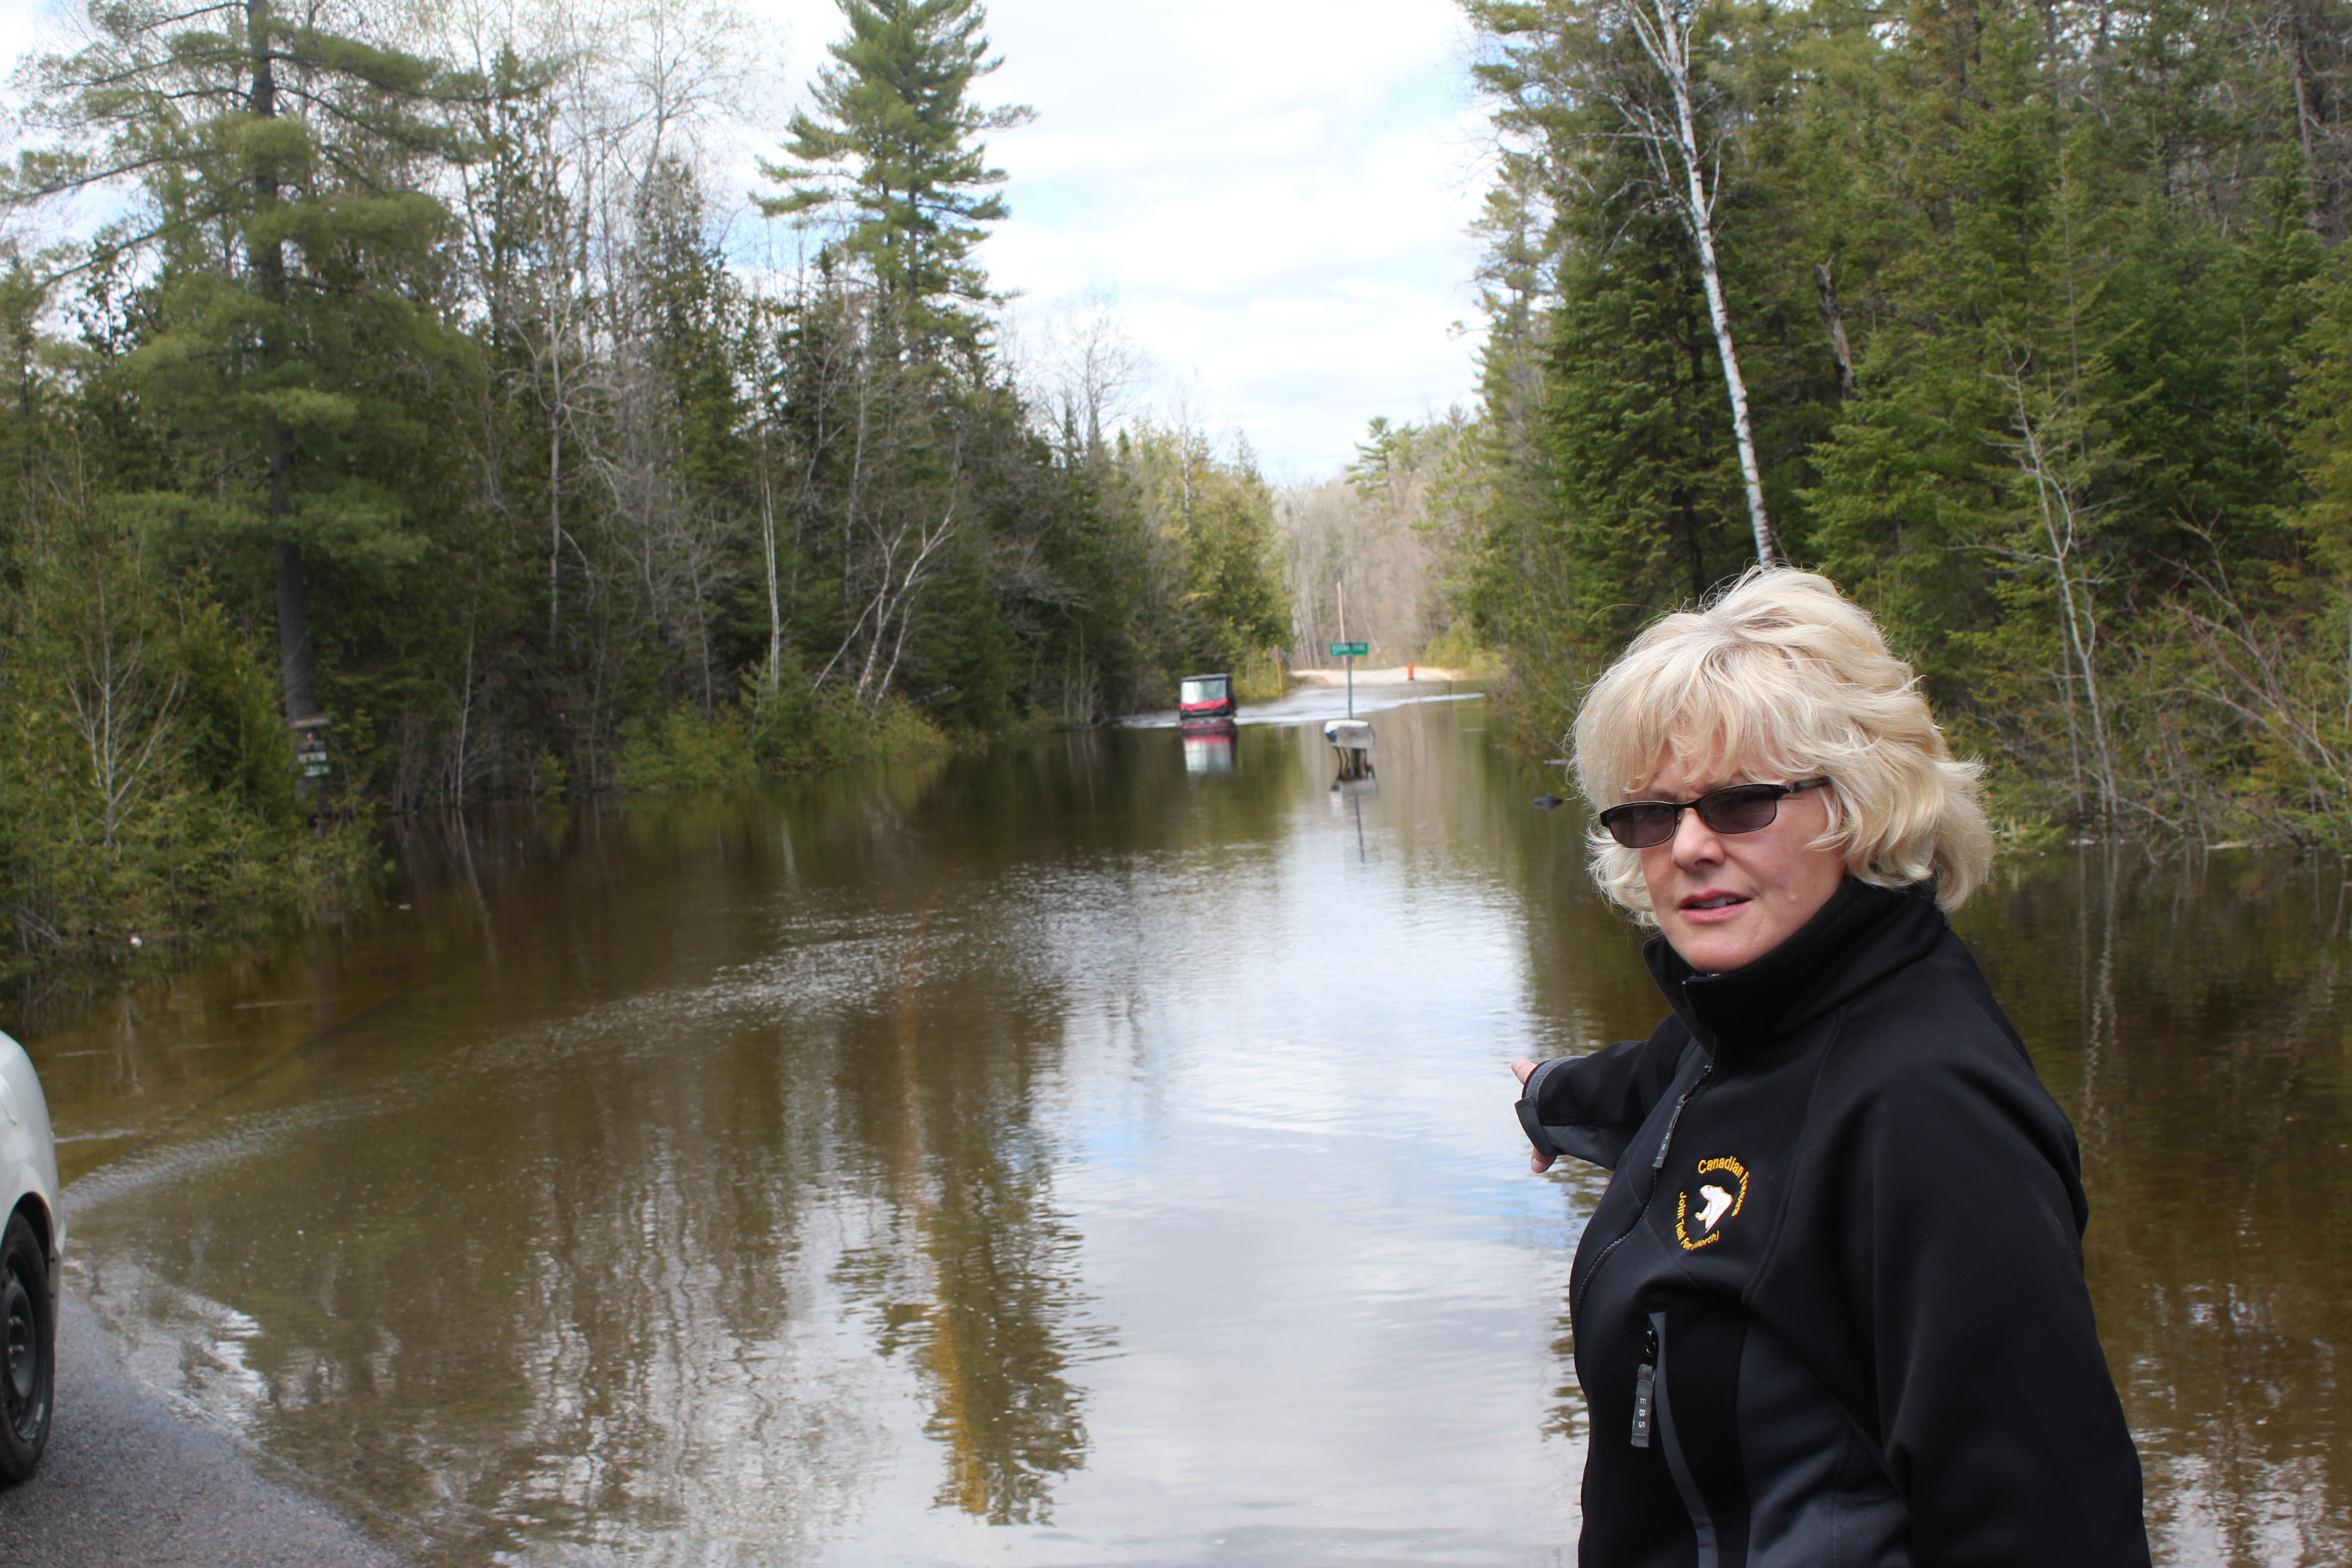 Too Early to Declare Victory on Ottawa River Flood Plan Back-Paddling